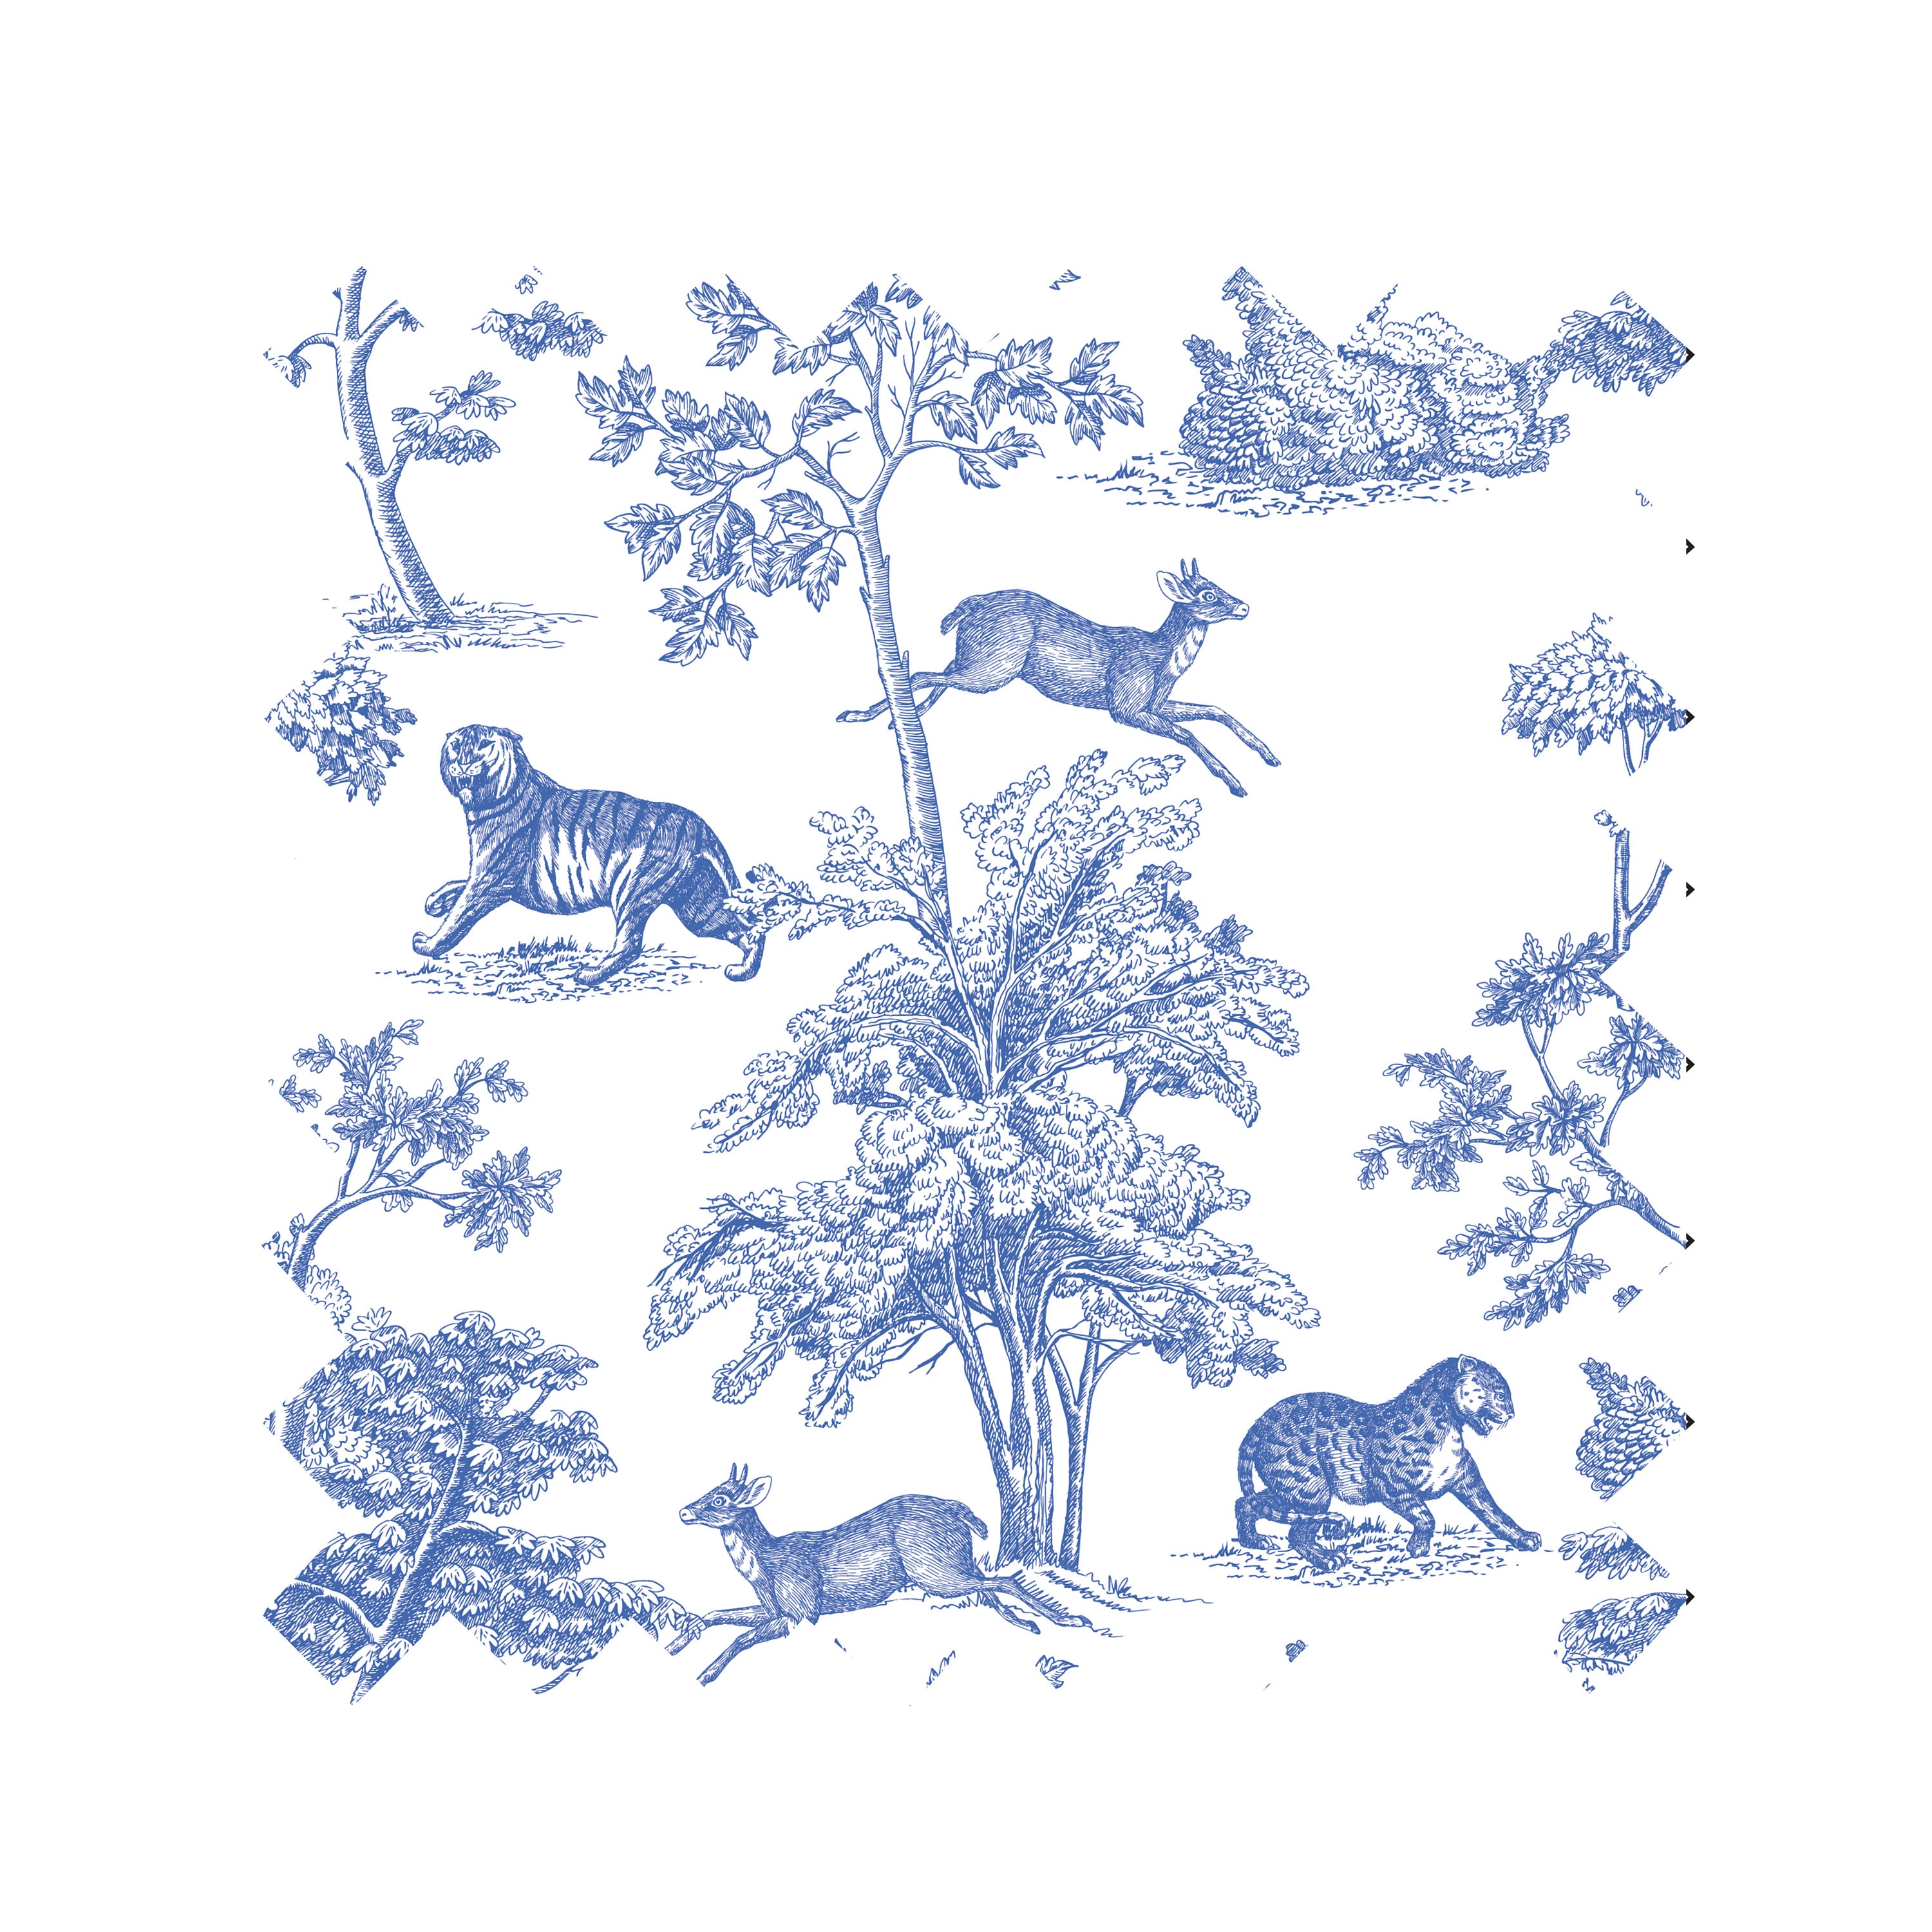 Blue Texas Toile Fabric - Texas Toile by wrennworks - Blue Bear Toile  Southwest French Country Cougar Fabric by the Yard by Spoonflower